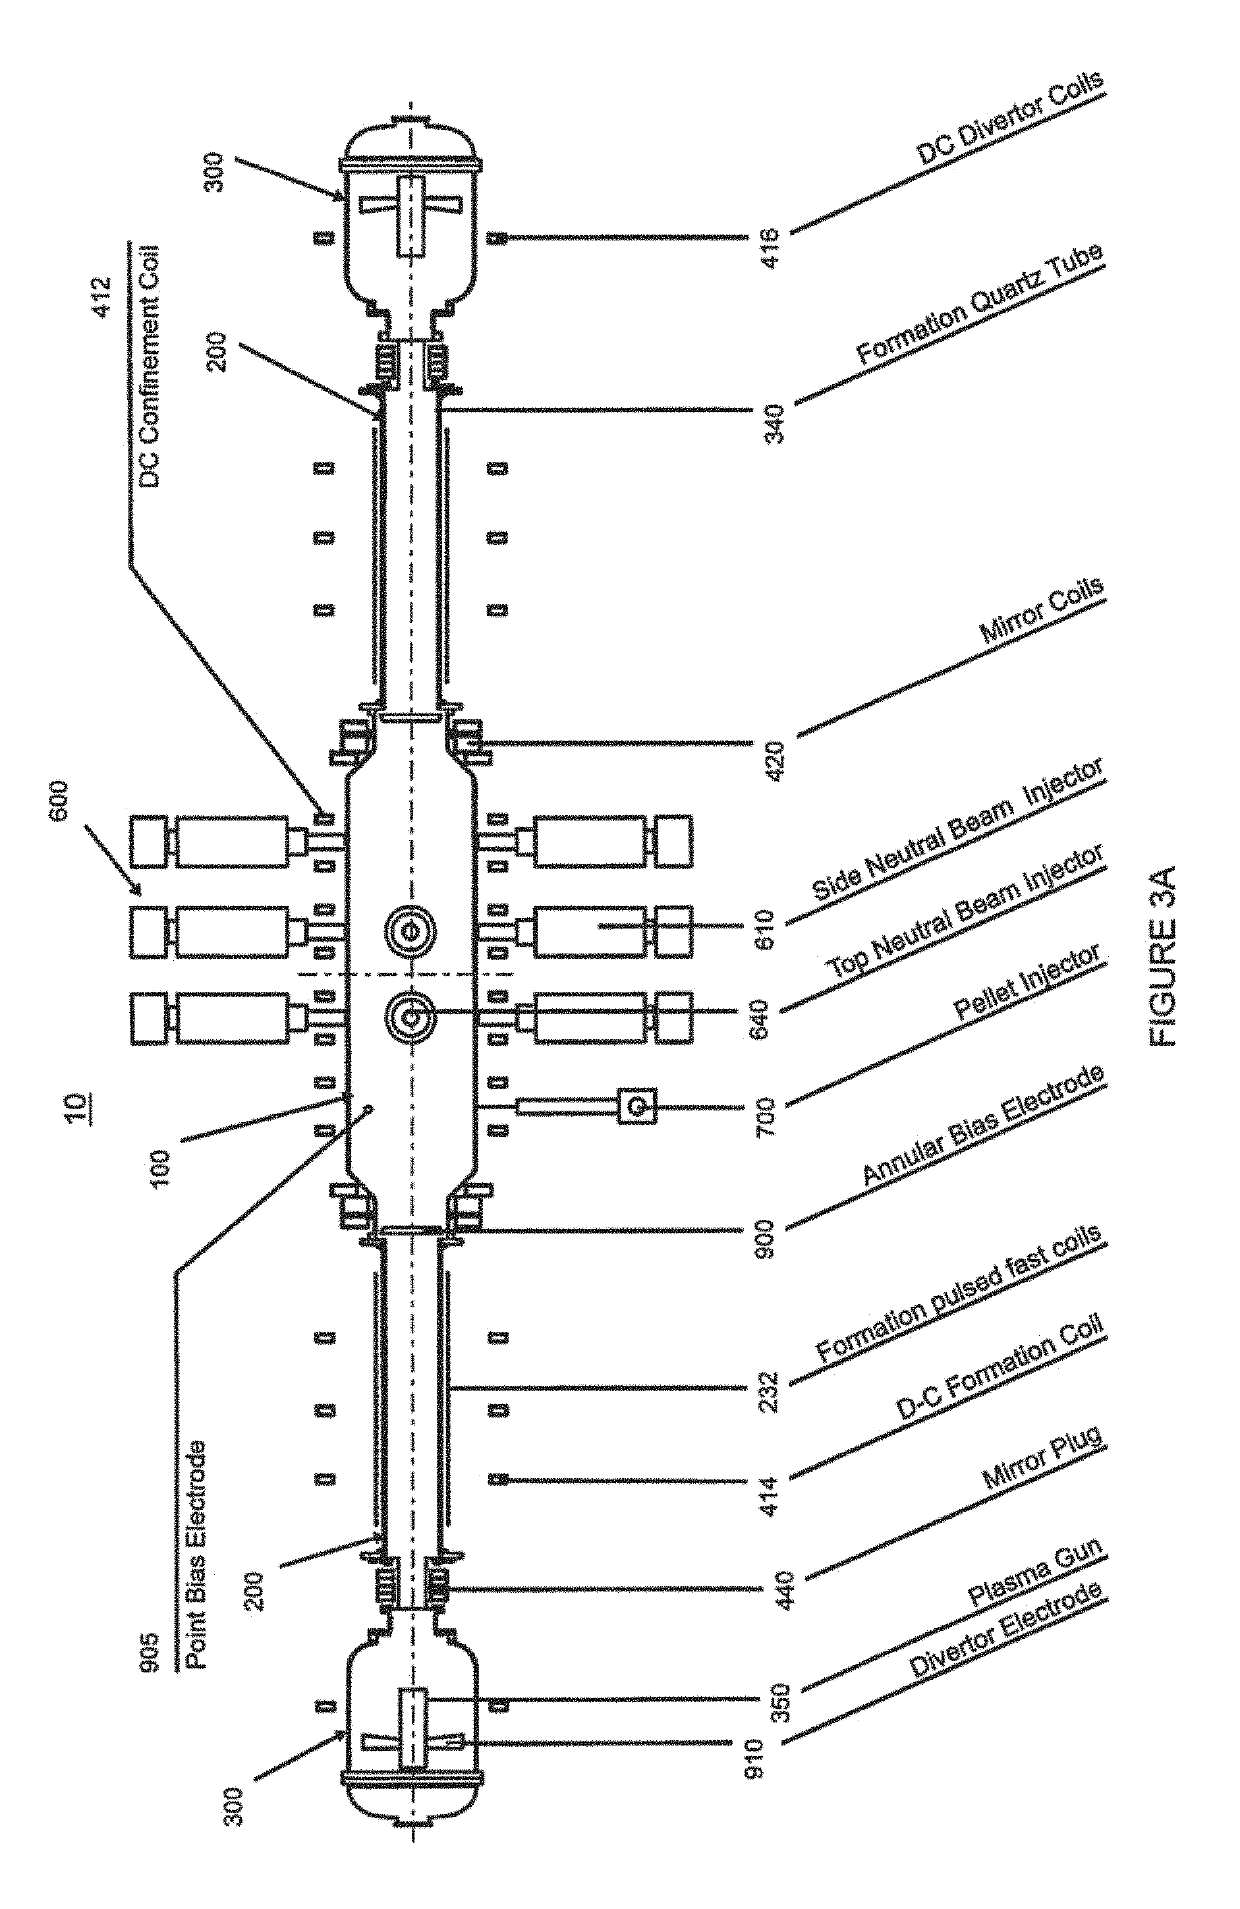 Systems and methods for forming and maintaining a high performance FRC